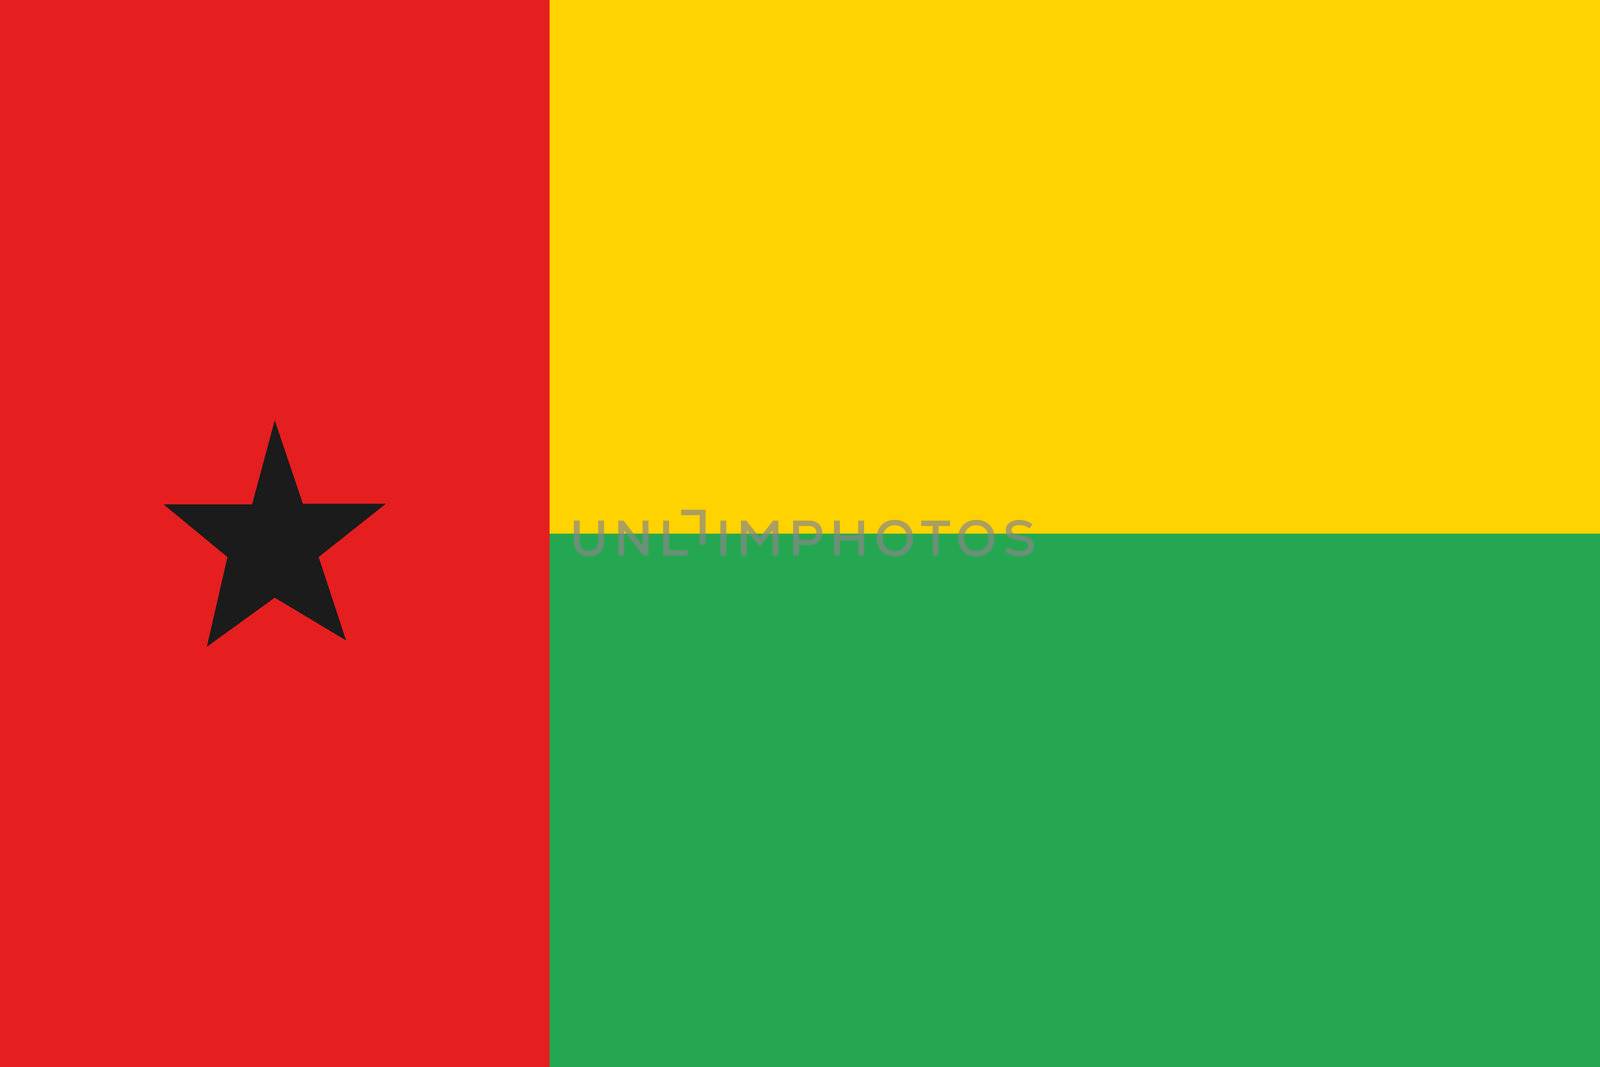 An illustration of the flag of Guinea Bissau